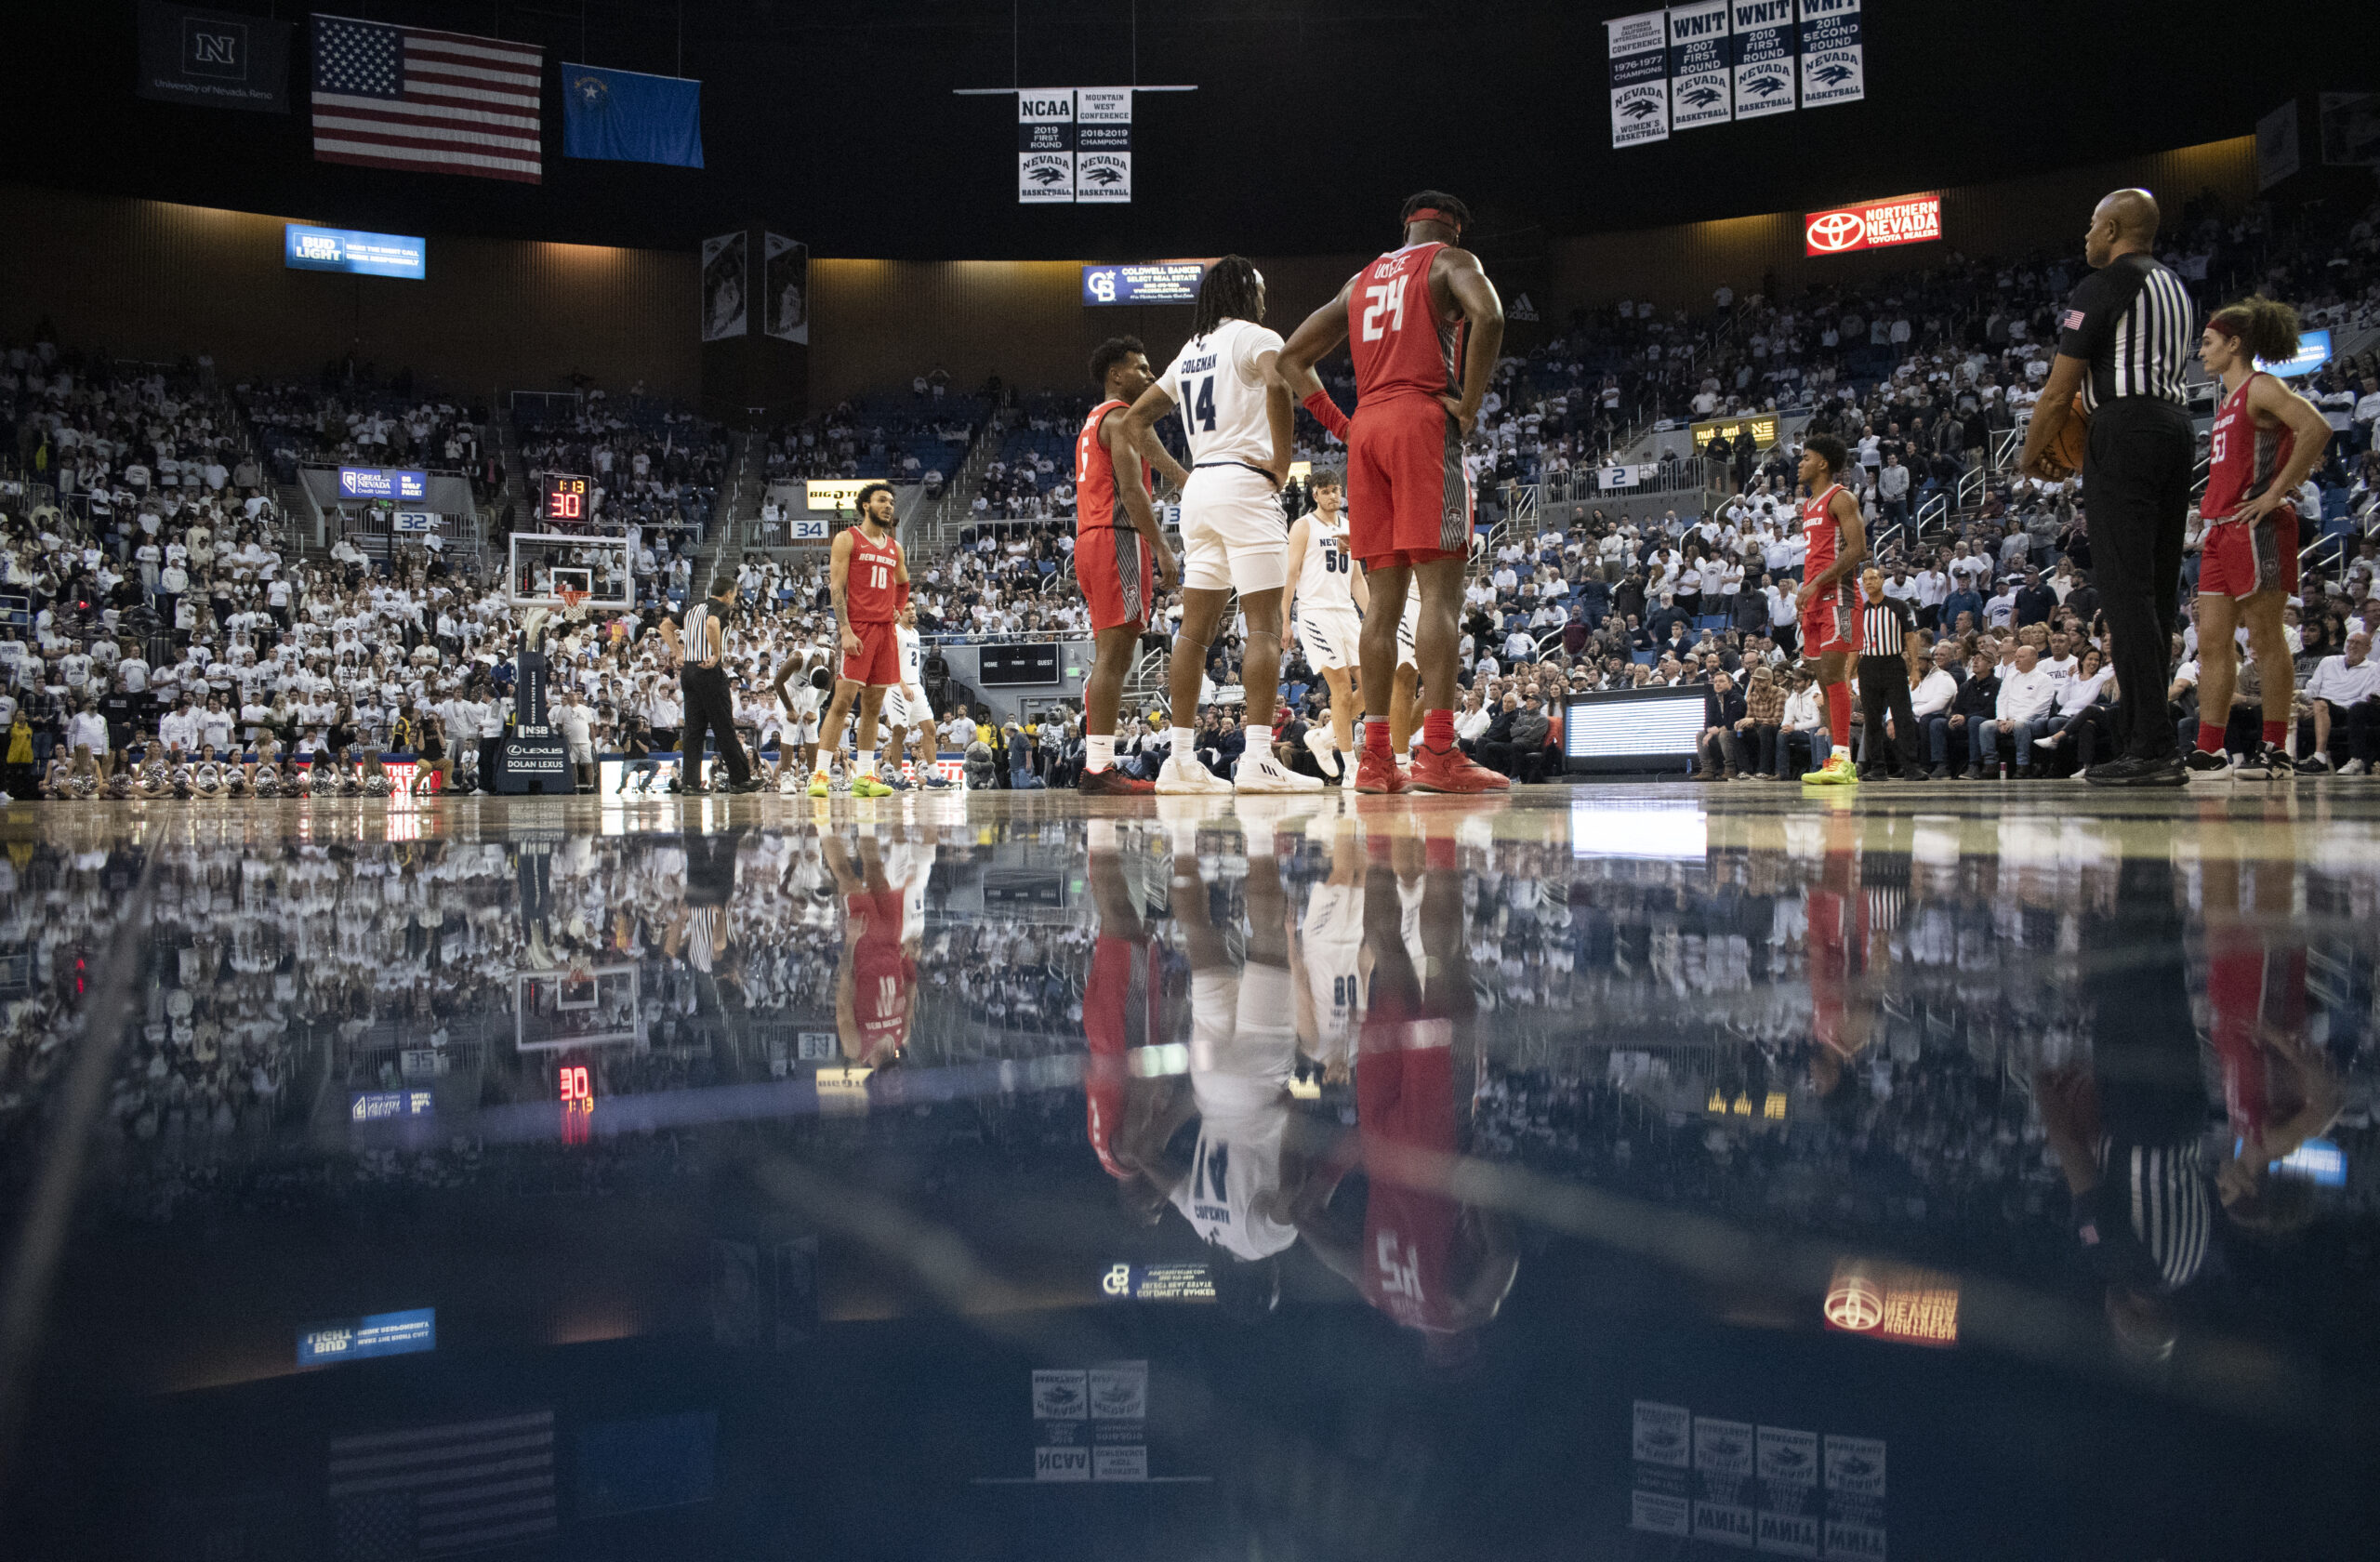 Nevada takes down New Mexico ; 97-94 in double overtime clash